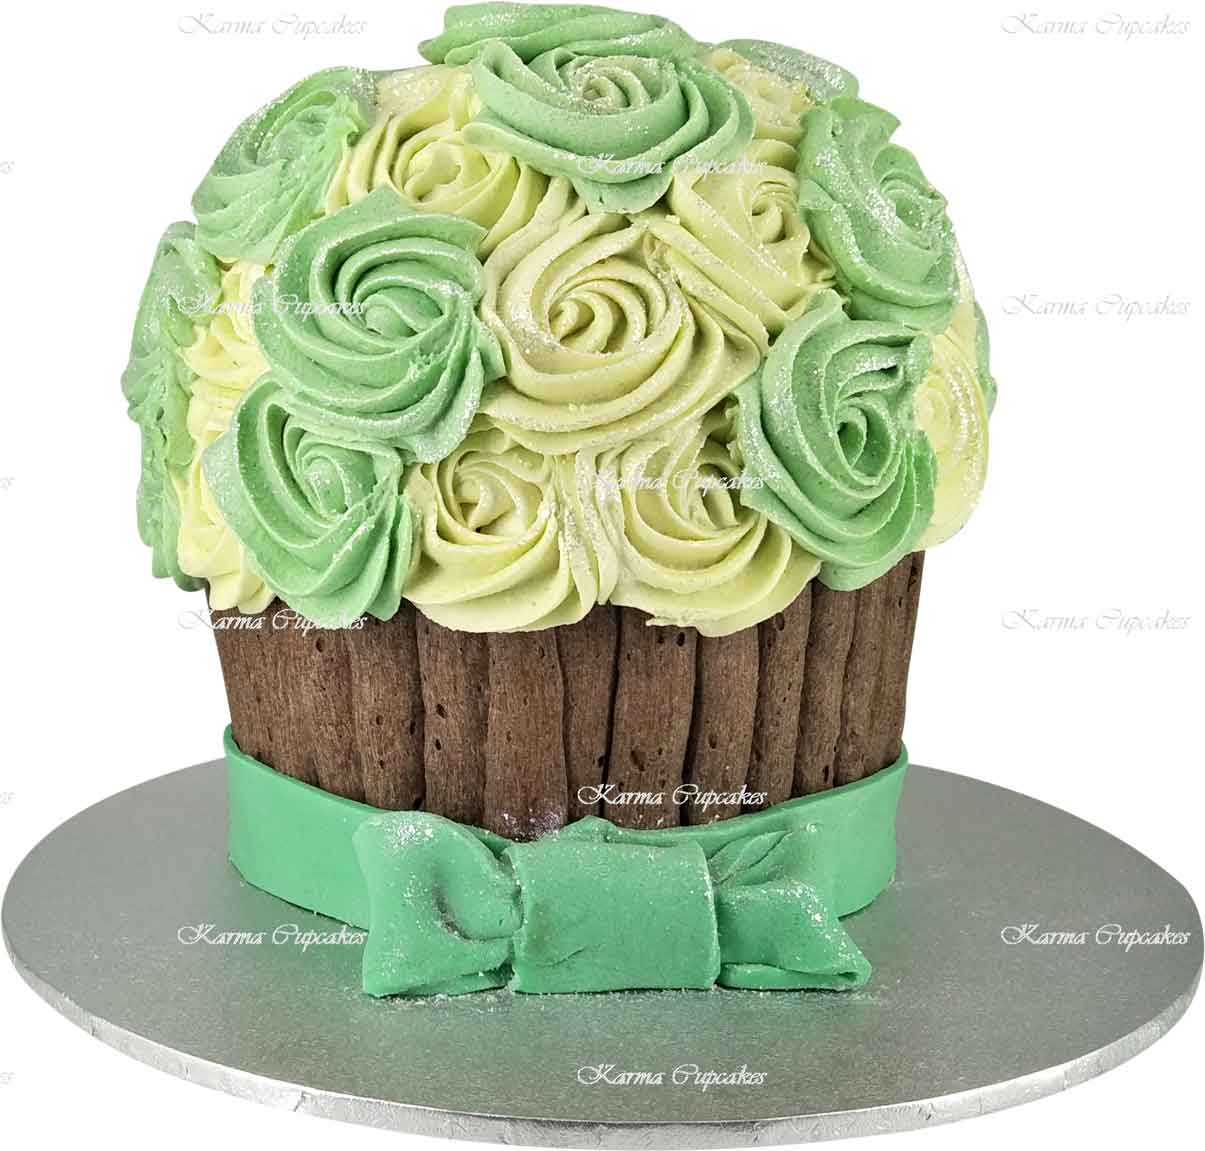 Giant-Cupcakes-Green-and-Yellow